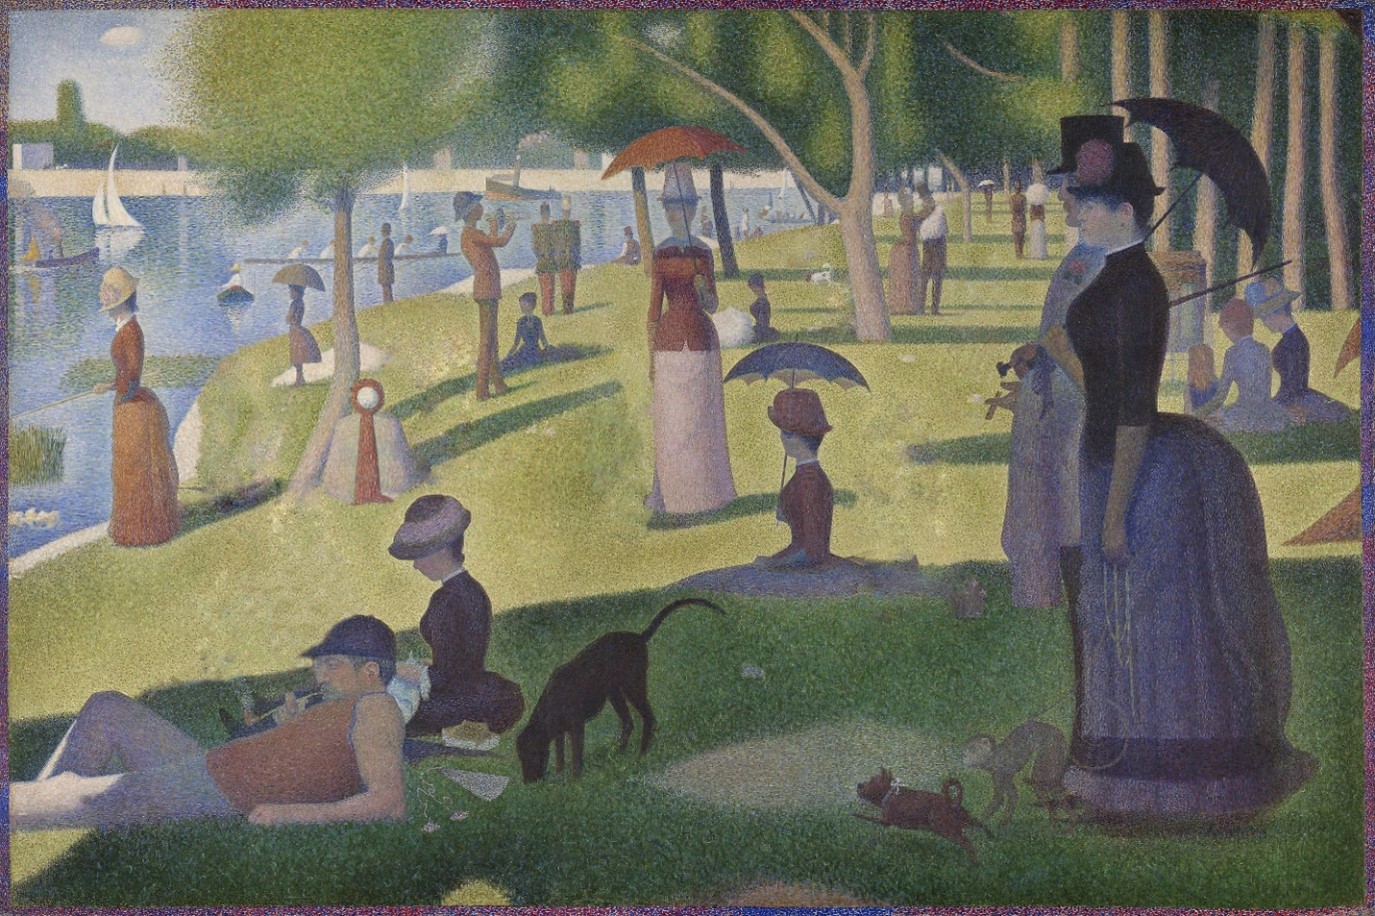 A painting depicts a crowd of individuals gathered in a park along a river. Compared with figure 3, individuals have been removed from the painting, representing suppression, which preserves privacy by not releasing data about certain subgroups.